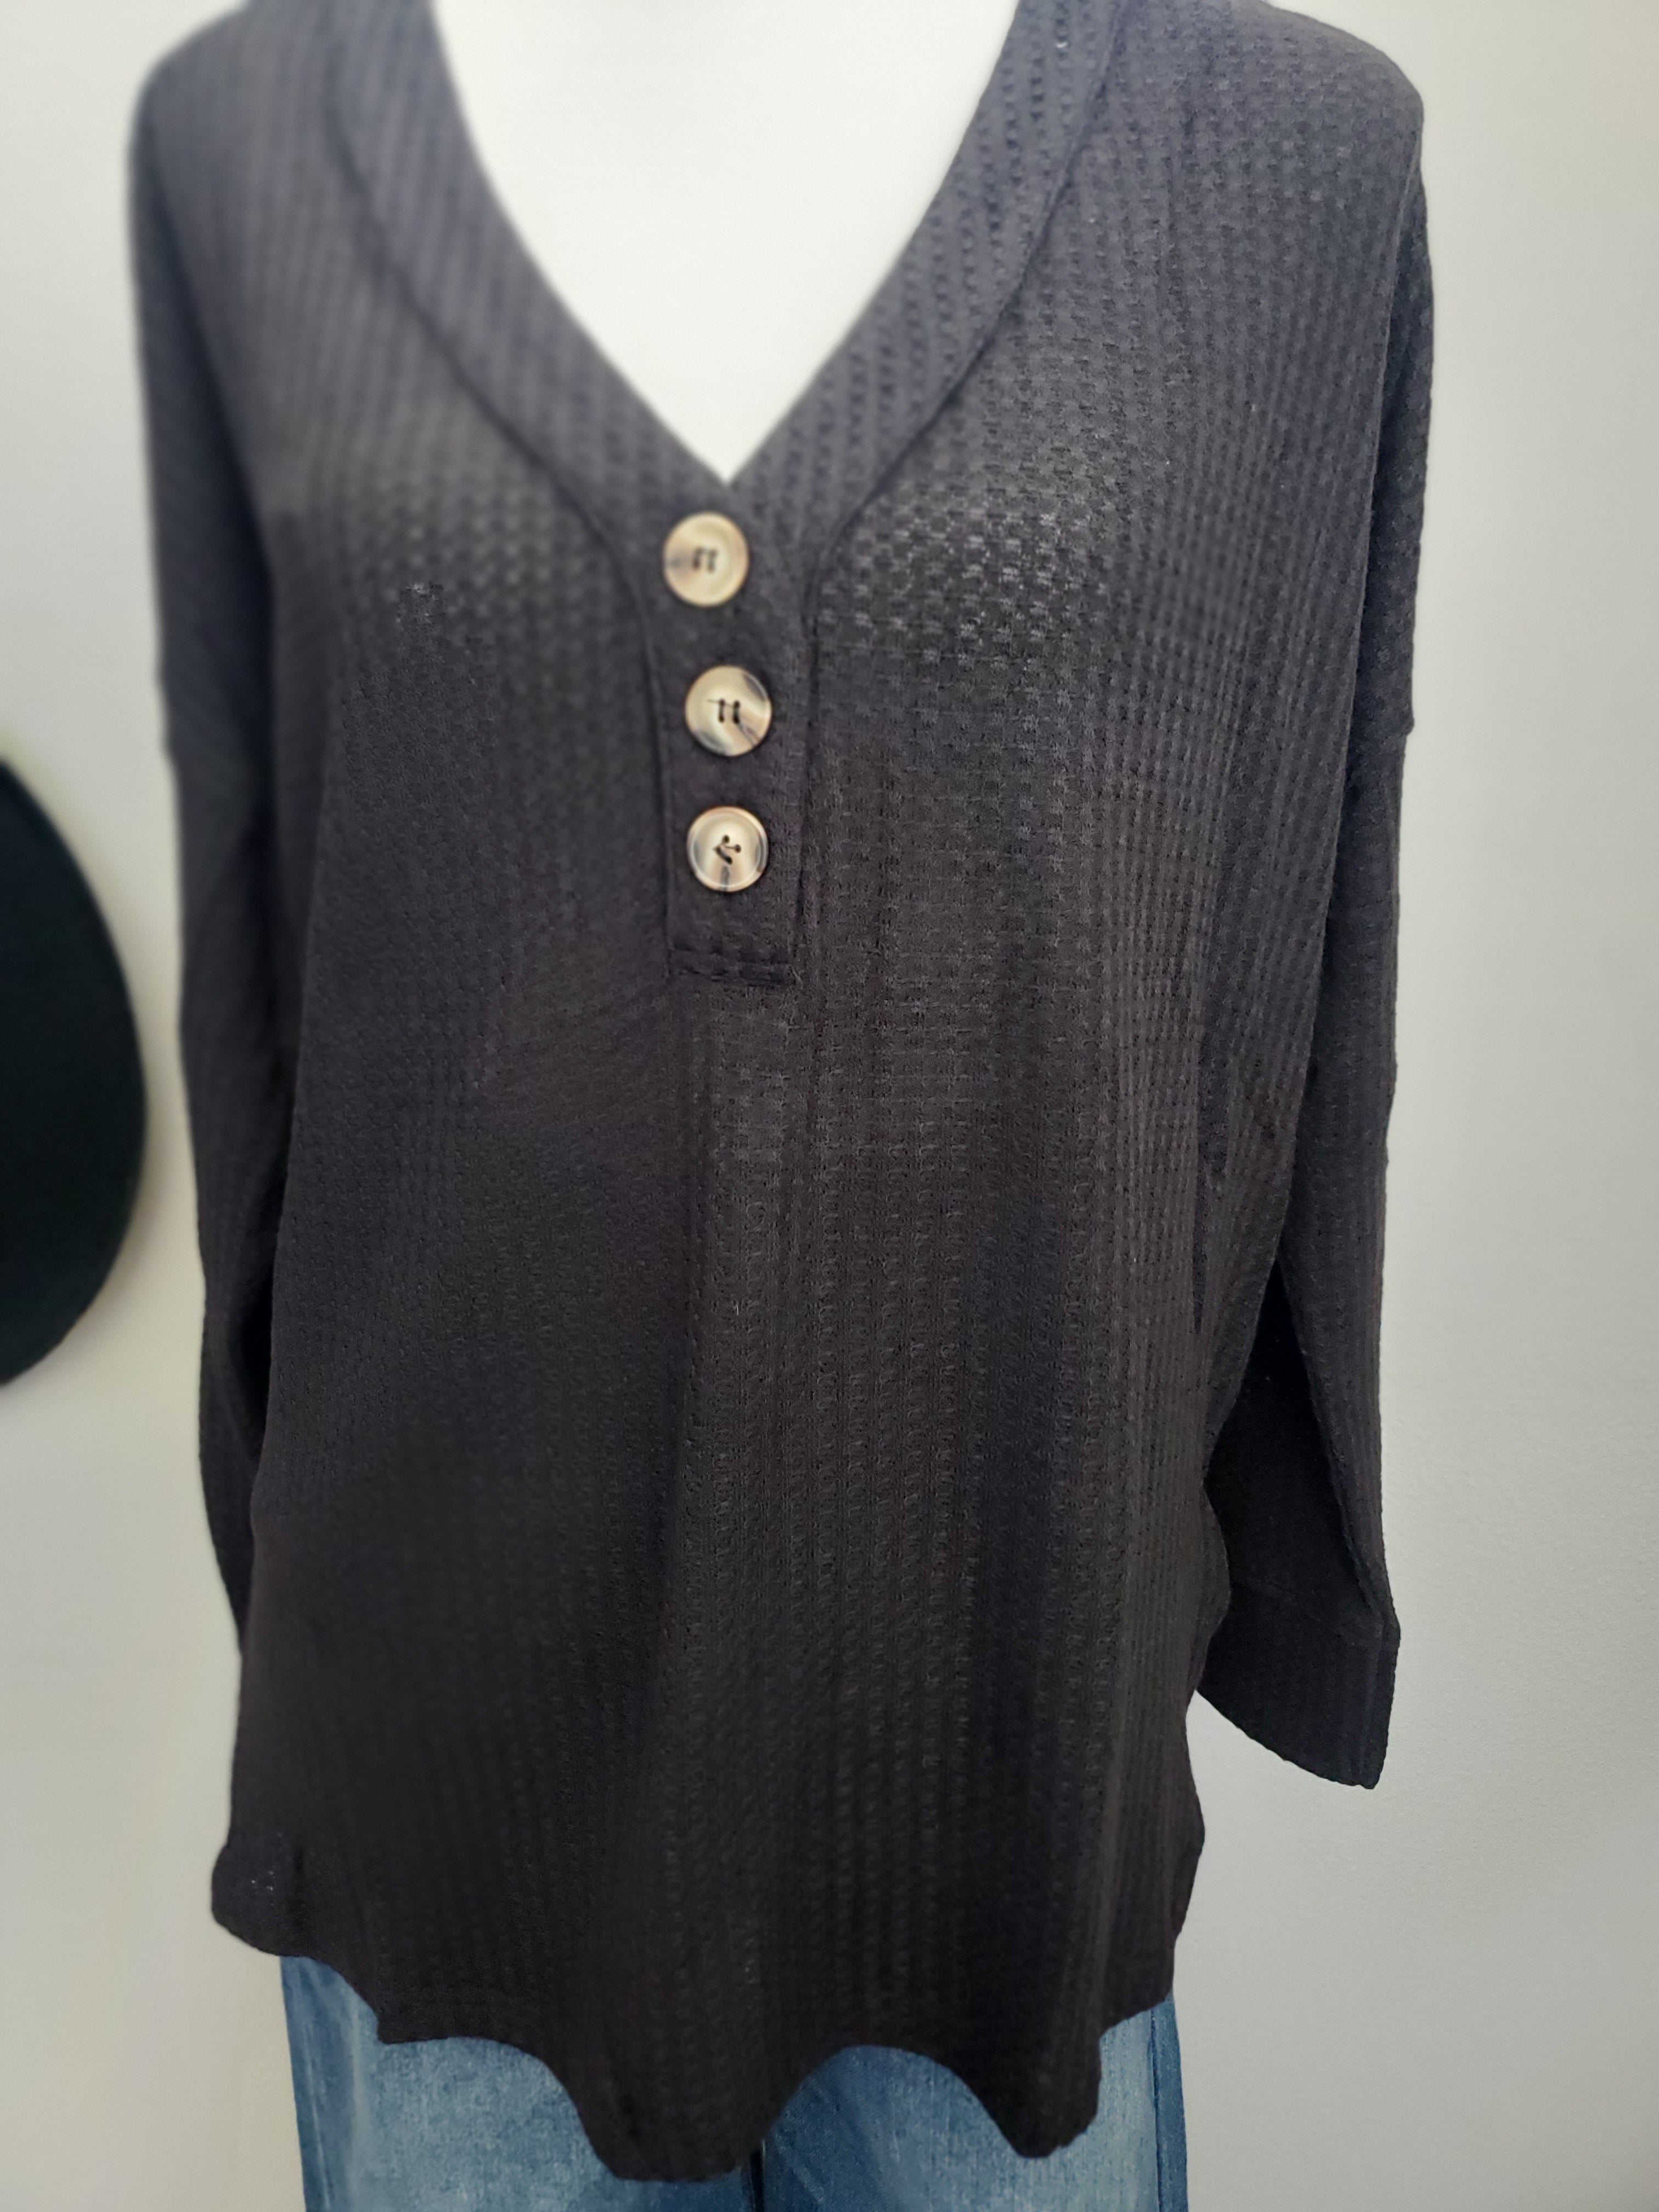 WAFFLE KNIT BUTTON UP HENLEY